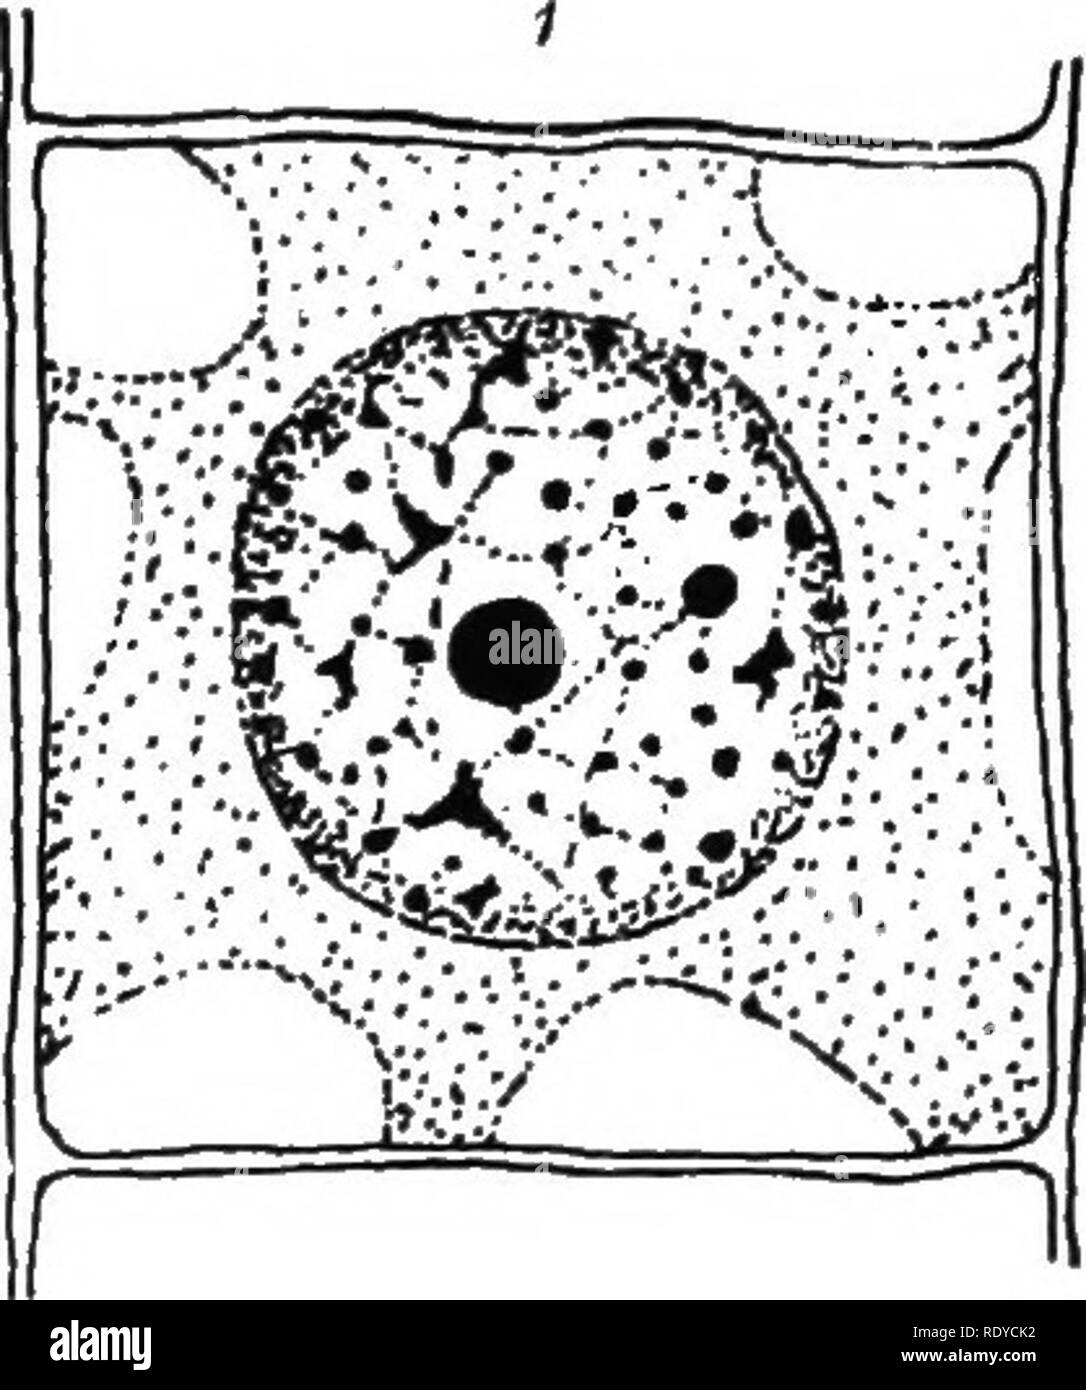 . The plant cell, its modifications and vital processes; a manual for students. Plant physiology; Plant anatomy; Plant cells and tissues. 102 THli; PLANT CELL. larger masses of chromatin occur, termed net-knotS or karyosomes (see Fig. 1, Chap. i.). The chromatin is so-called on account of its capacitj' to take u) stains like hcematoxylin and safranin. (e) Other structures which, like the chromatin, are able to take up certain stains, are the nucleoli or plasmosomes. These lie in the .•spaces between the linin network. There may be only one large nucleolus present situated centrally.. Please n Stock Photo